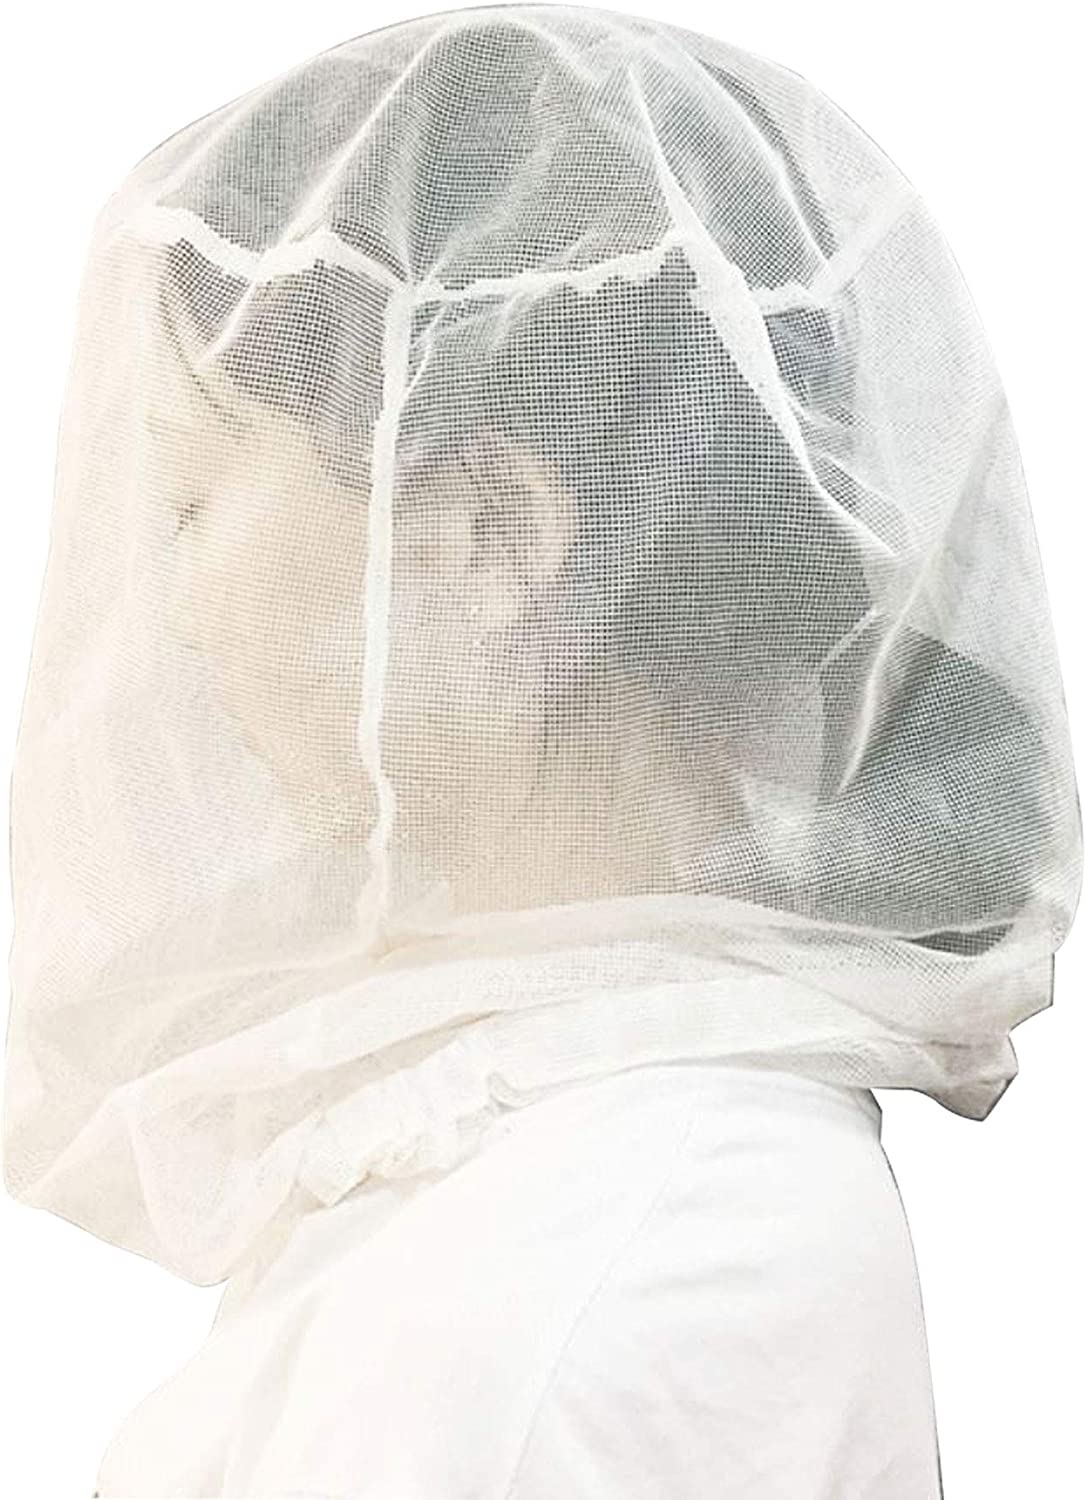 Head net Blocks EMF 5G UV Particle Bug, Protect heads from all hazards